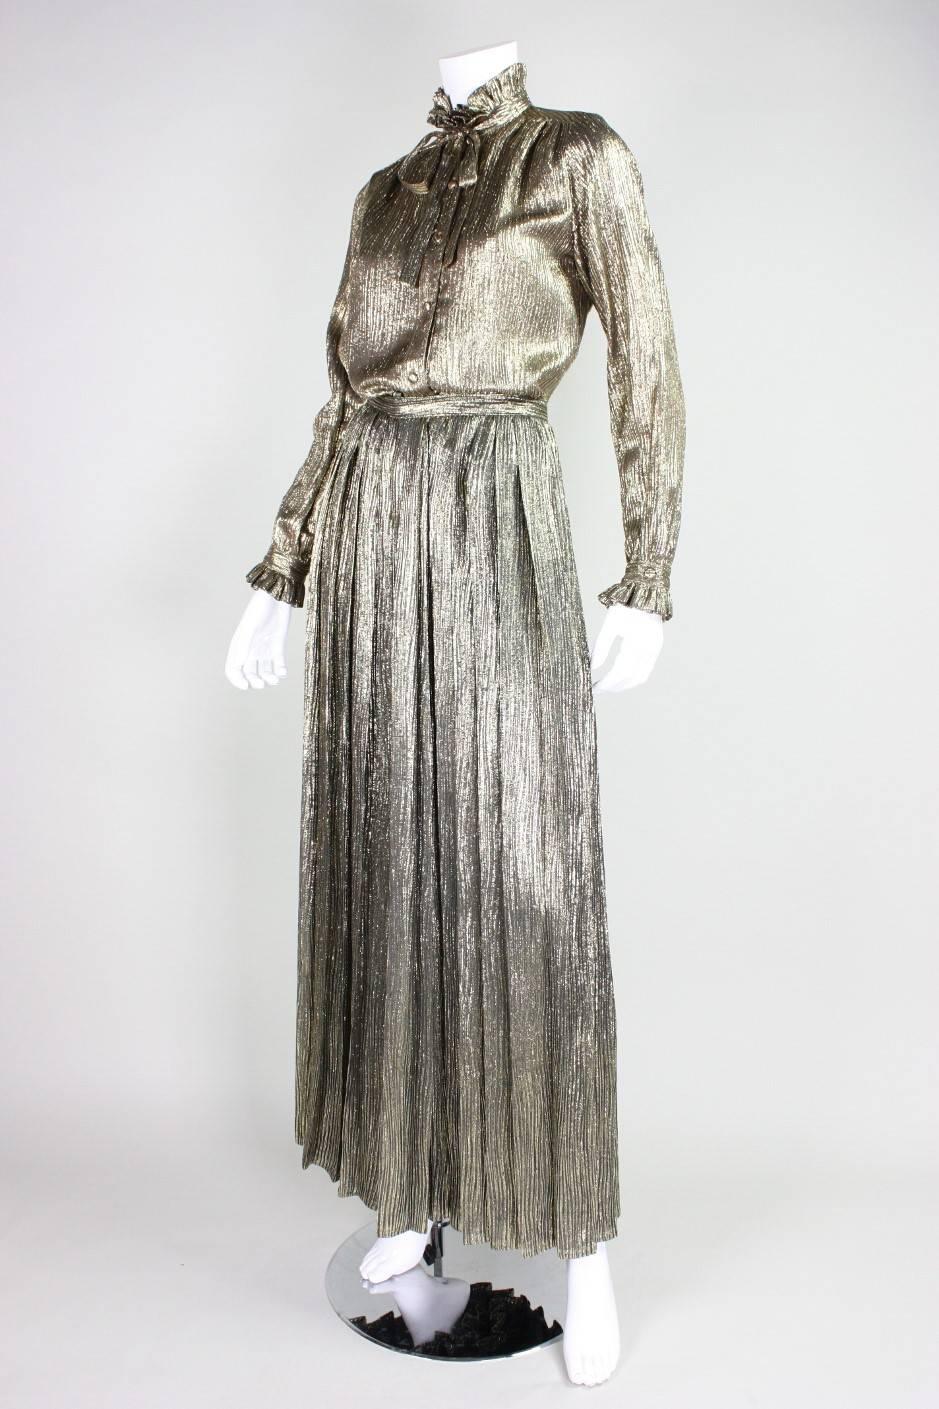 Vintage ensemble from Adolfo dates to the 1970's and is made of metallic gold lame fabric. Long-sleeved blouse has high neck with ruffled collar, center front neck tie, and covered button front closure.  High-waisted palazzo pants have center back